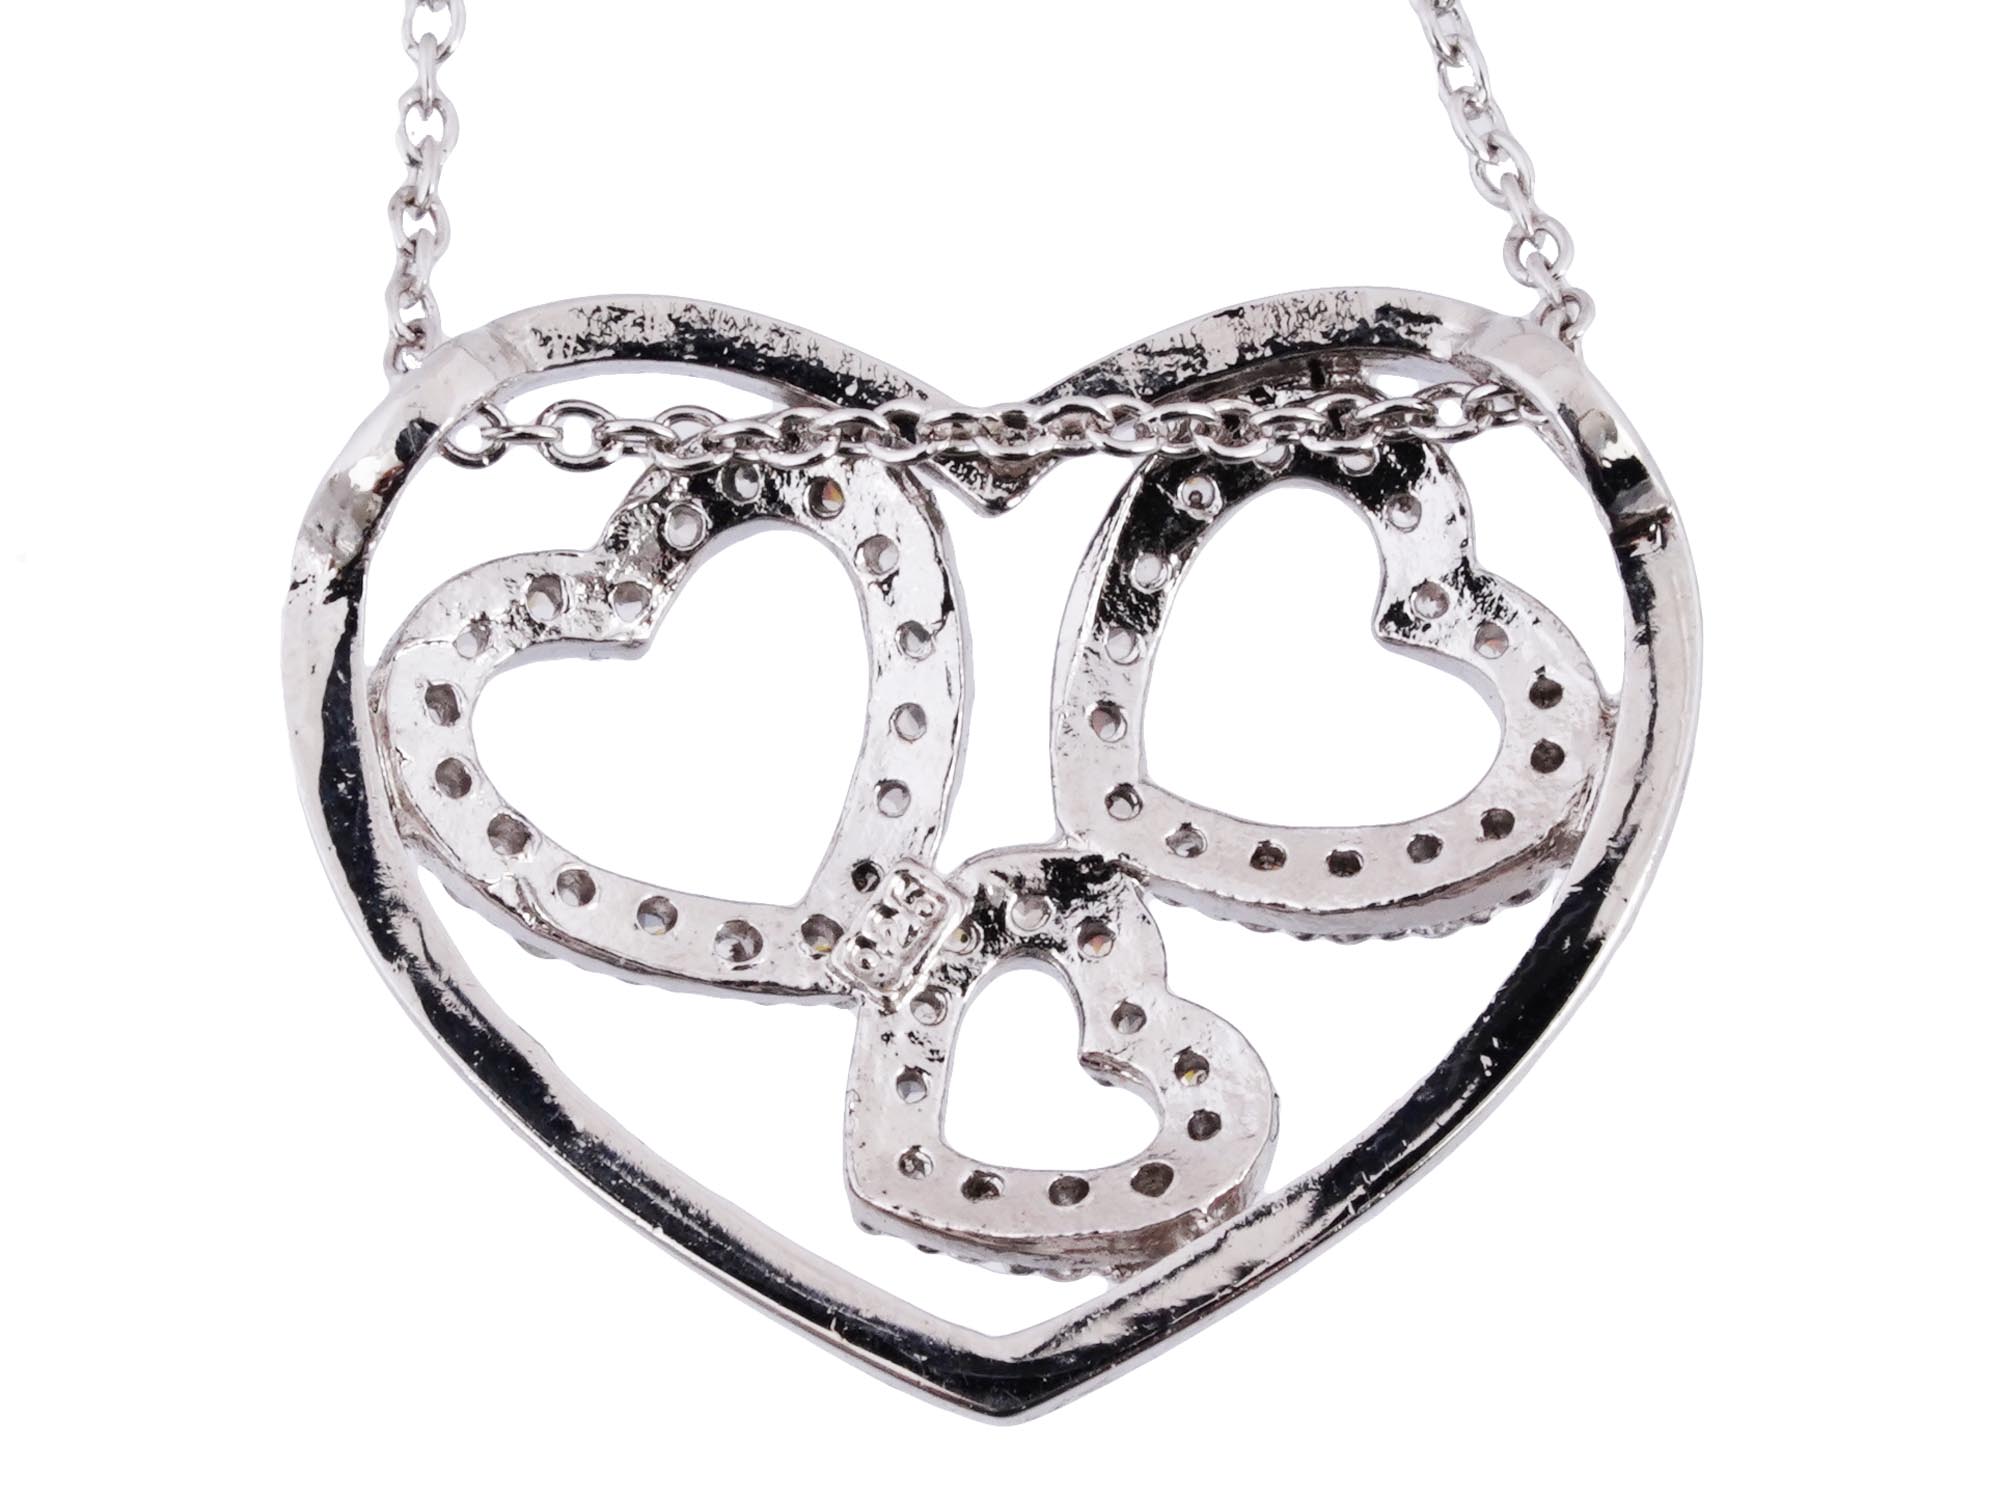 MODERN STERLING SILVER NECKLACE WITH HEART PENDANT PIC-2